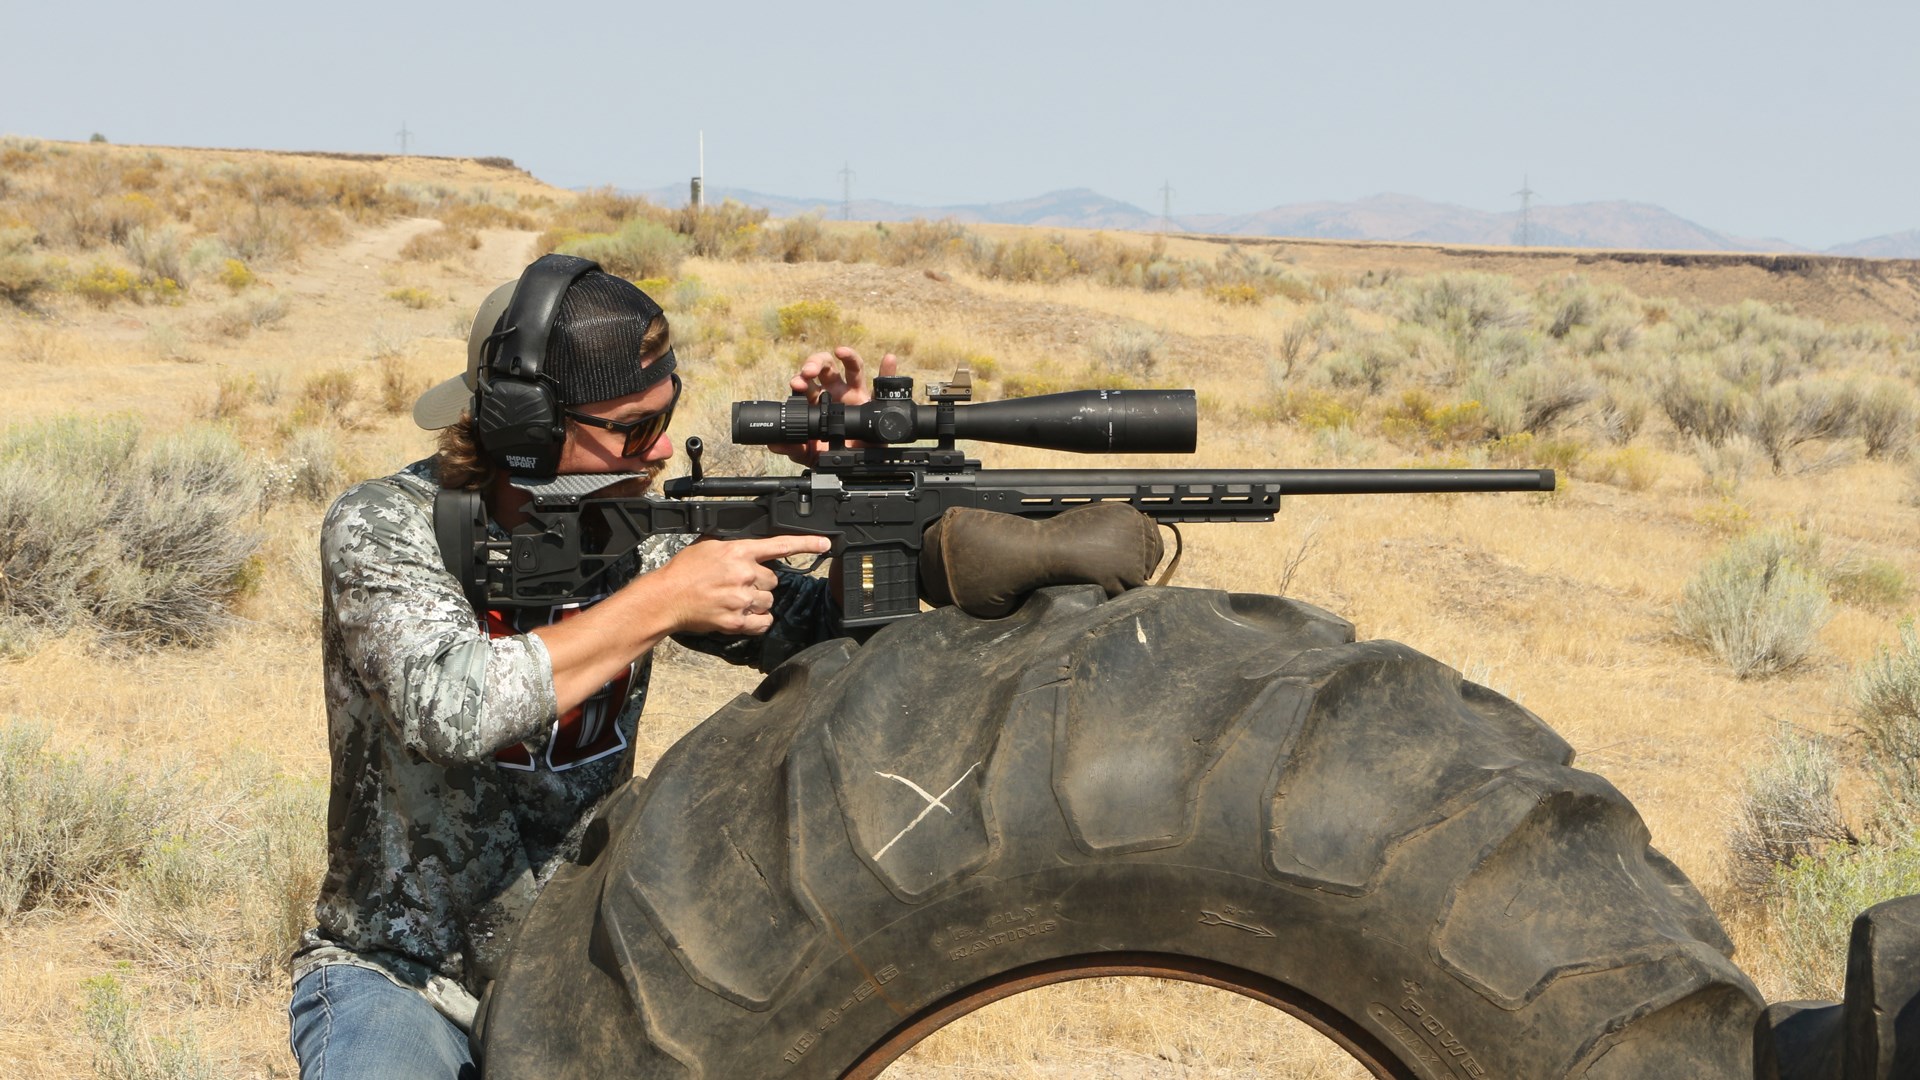 Recoil Recovery drill with shooter shown on tire with rifle adjusting optic outdoor desert high plains arid